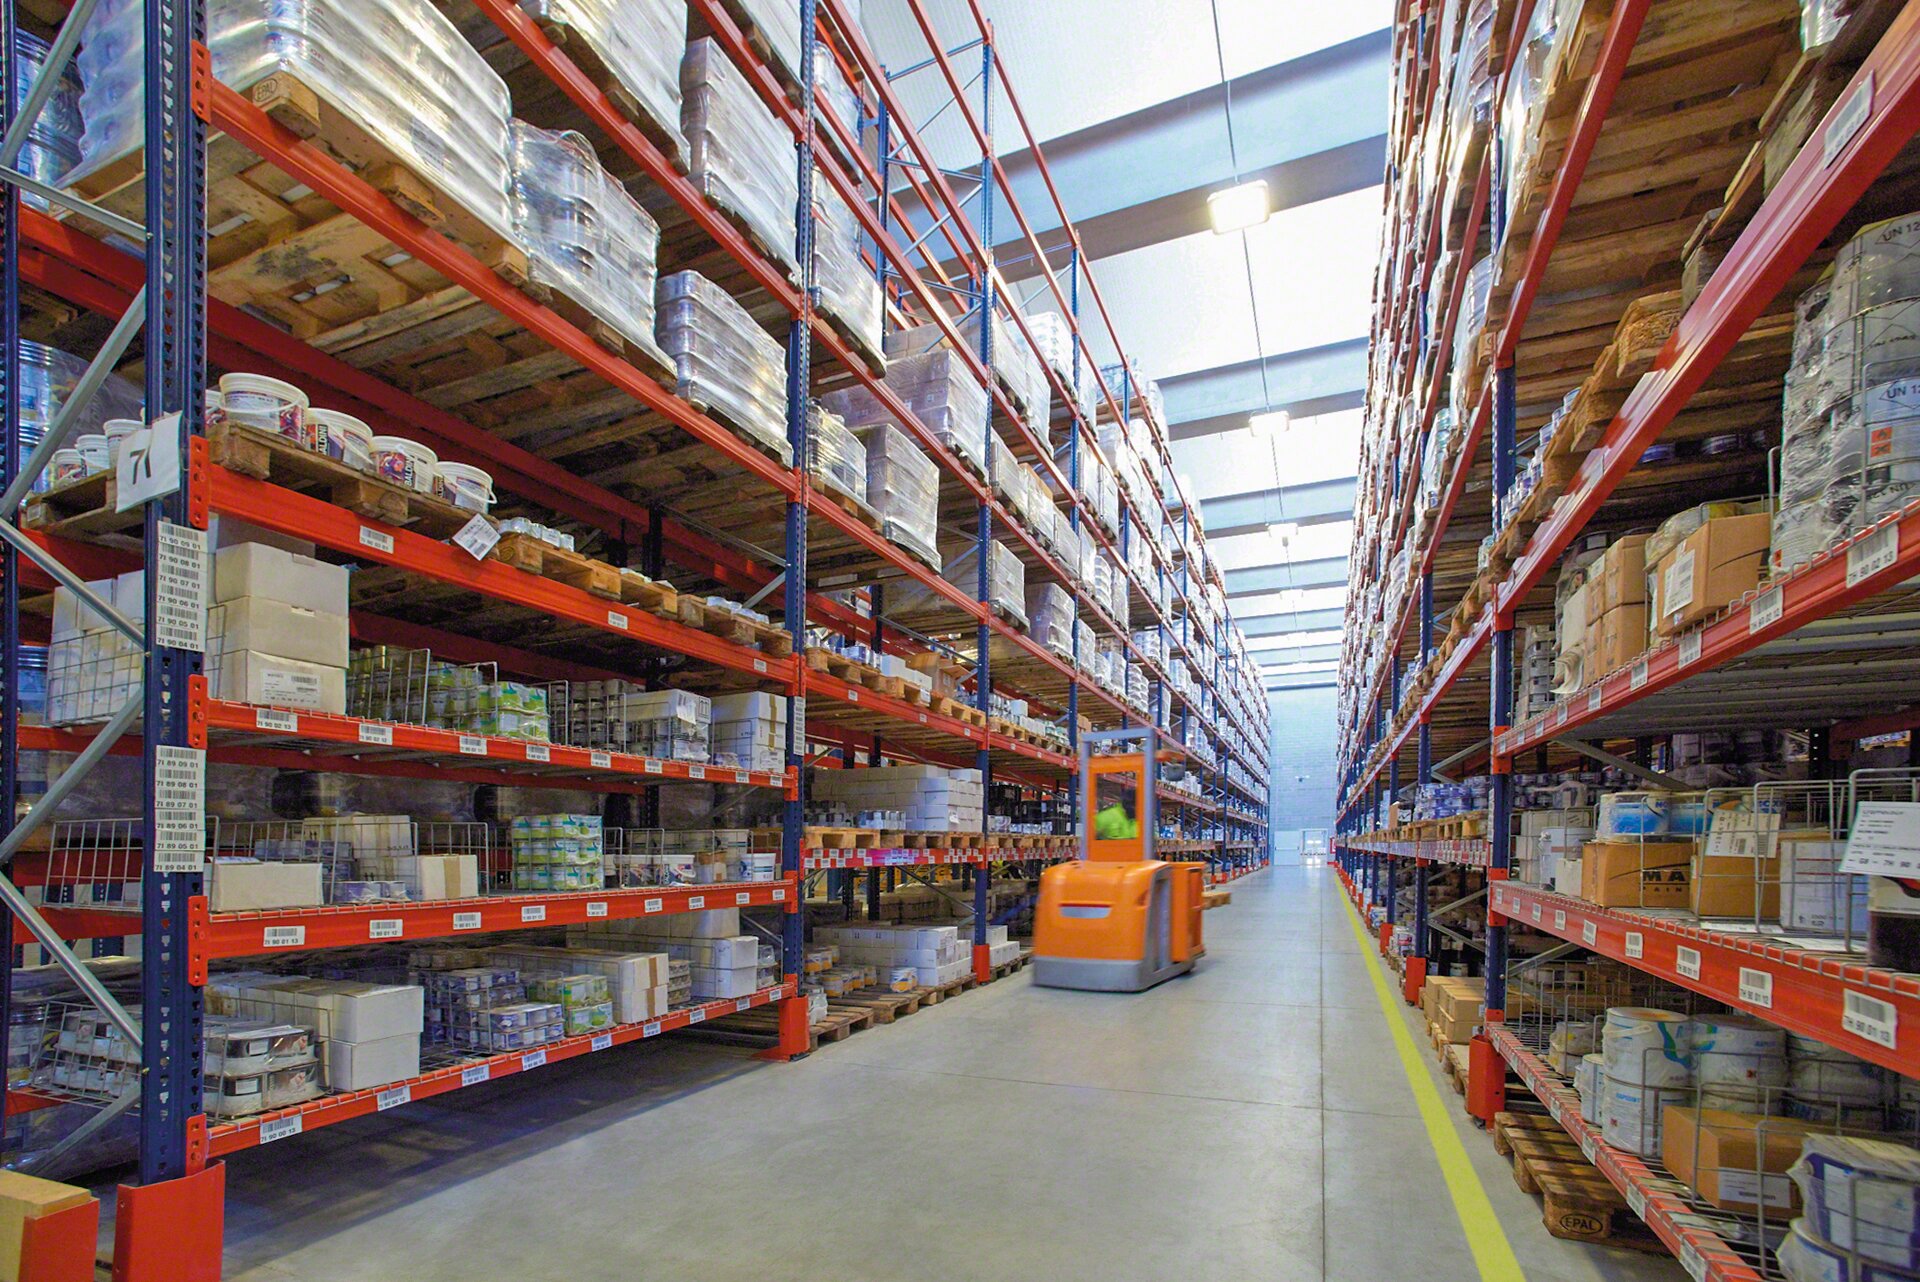 Pallet rack with shelving on the lower levels for order picking